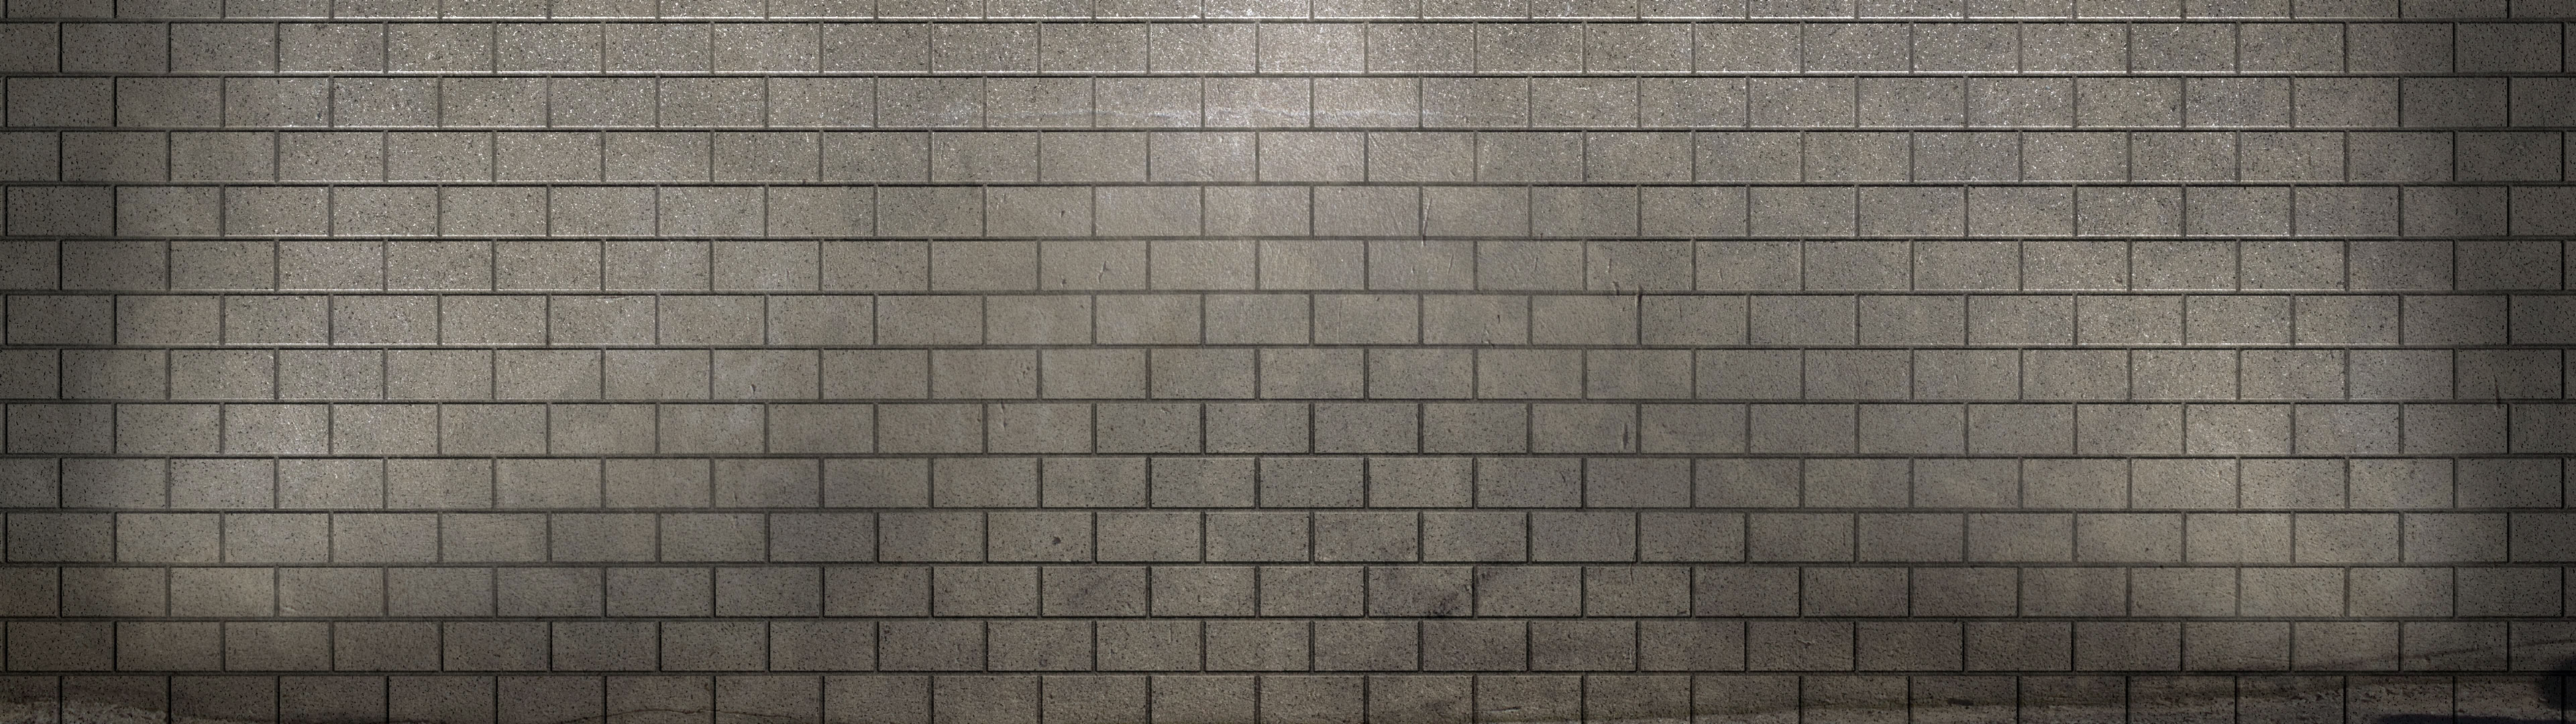 Wall Texture PPT Backgrounds